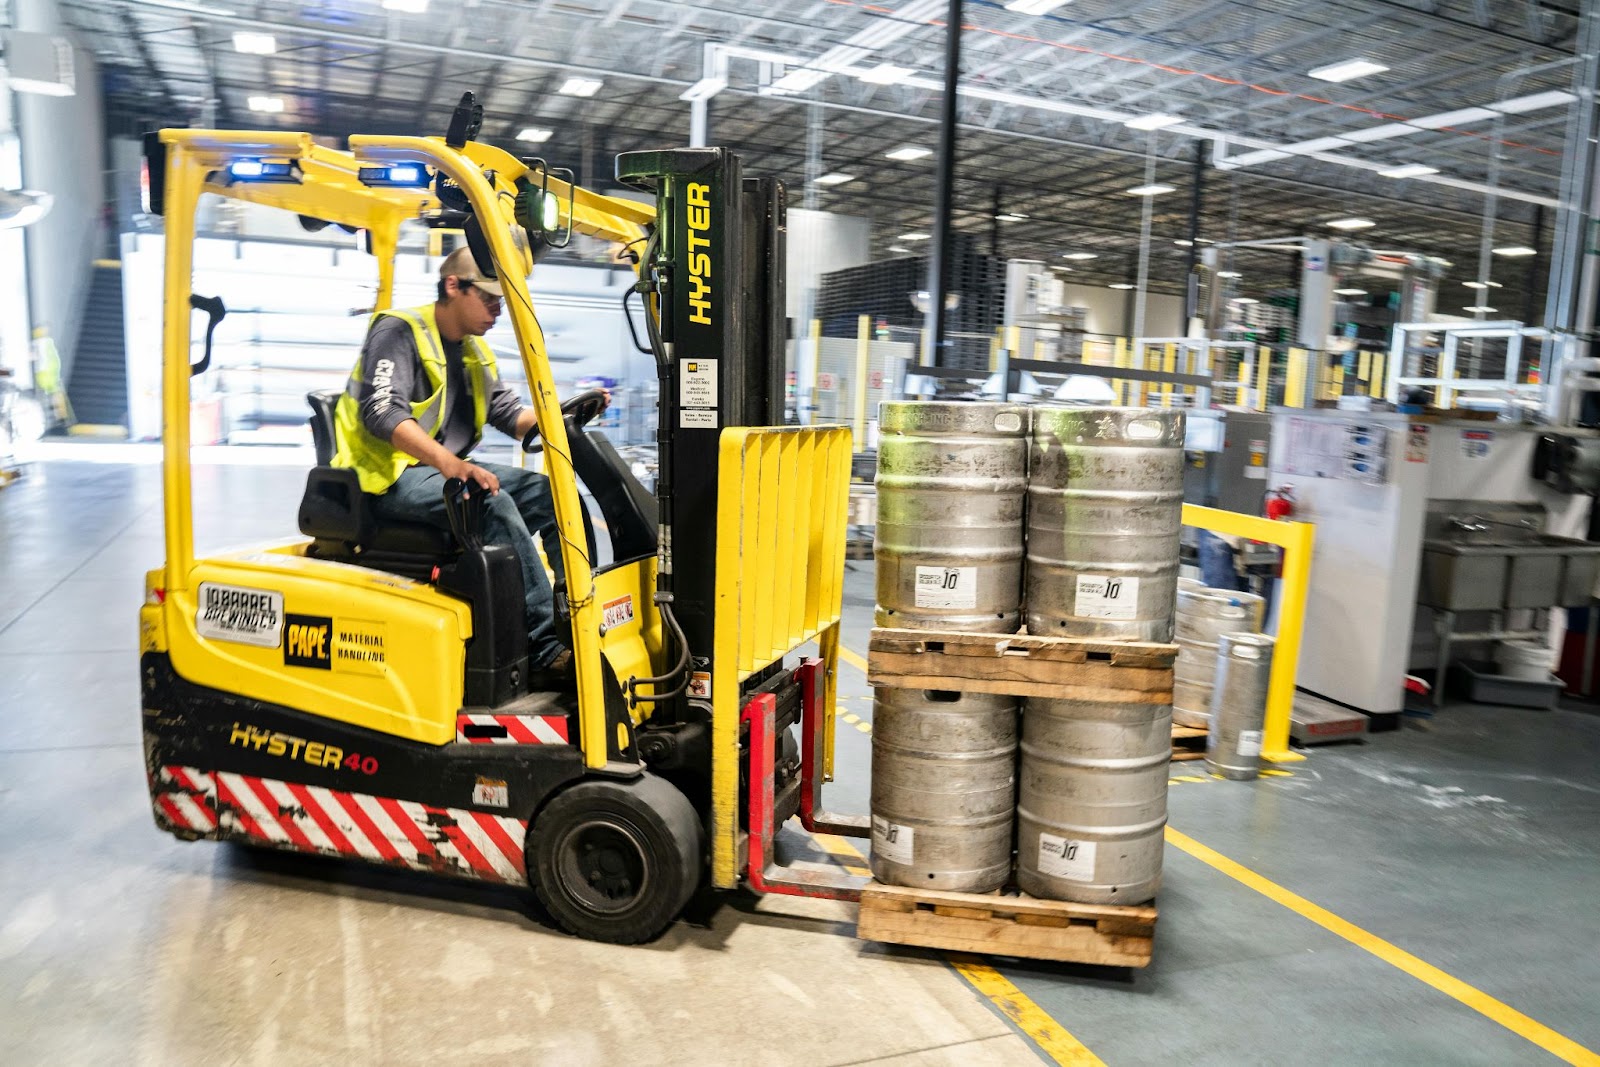 A yellow forklift hauling metal cans